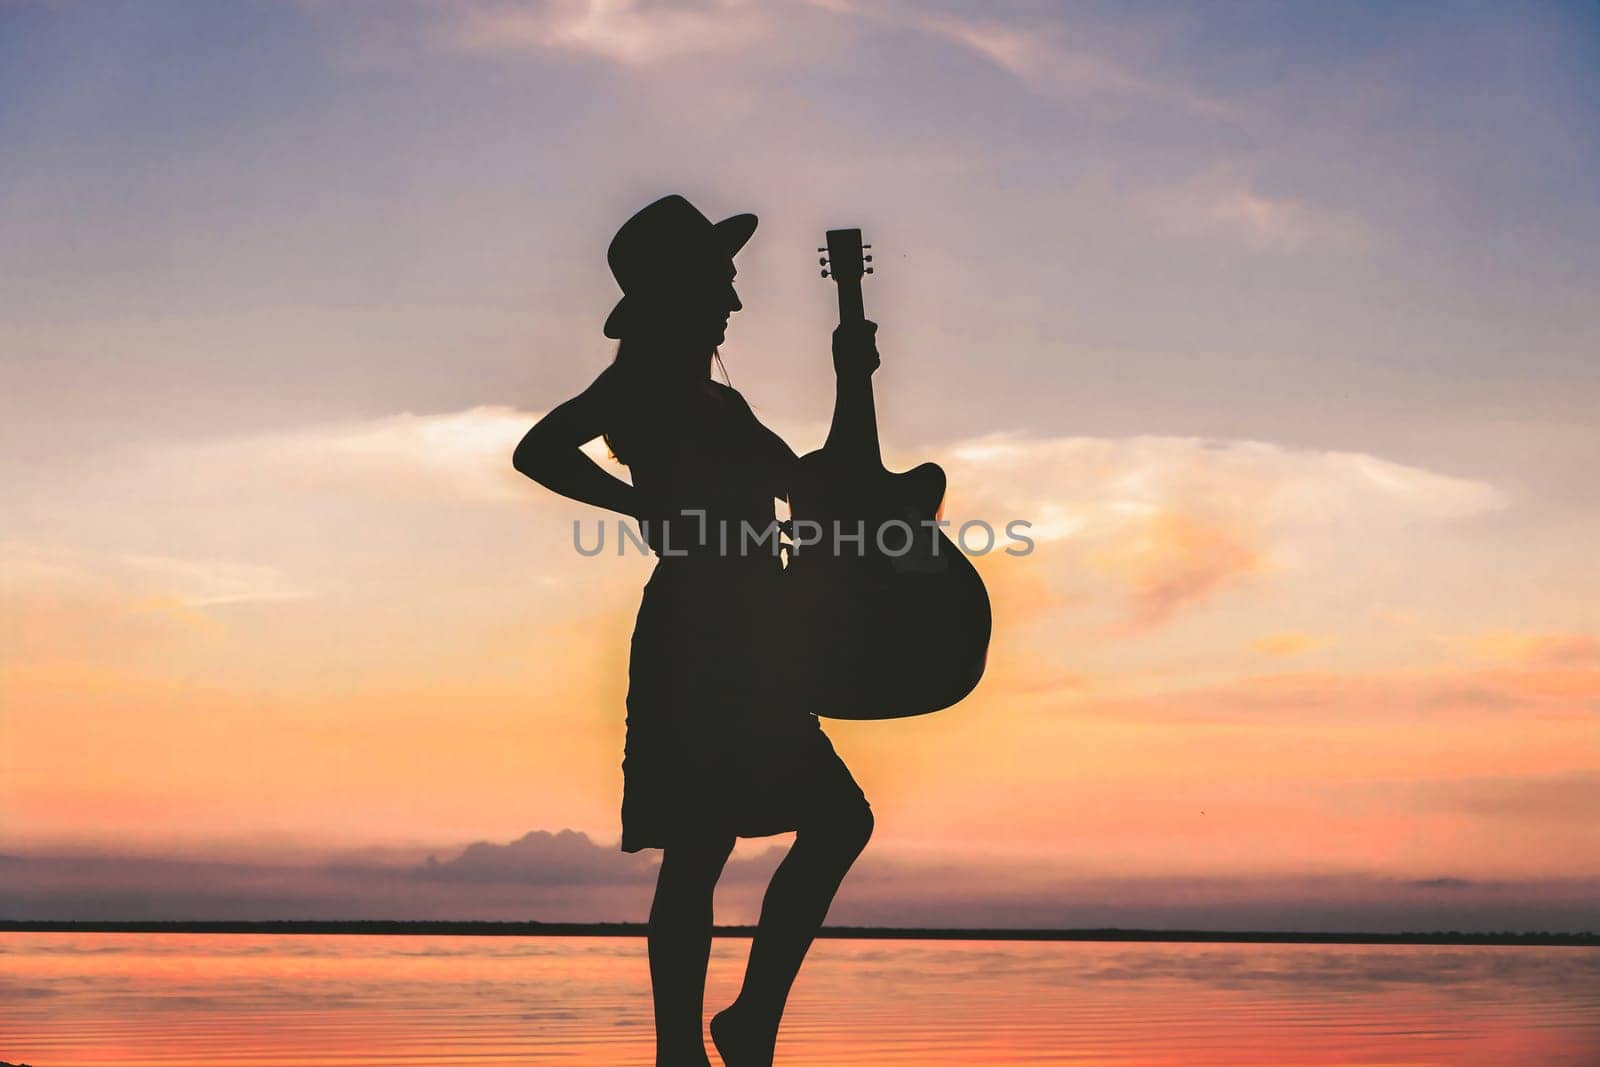 Woman and guitar with sunset silhouette download by igor010